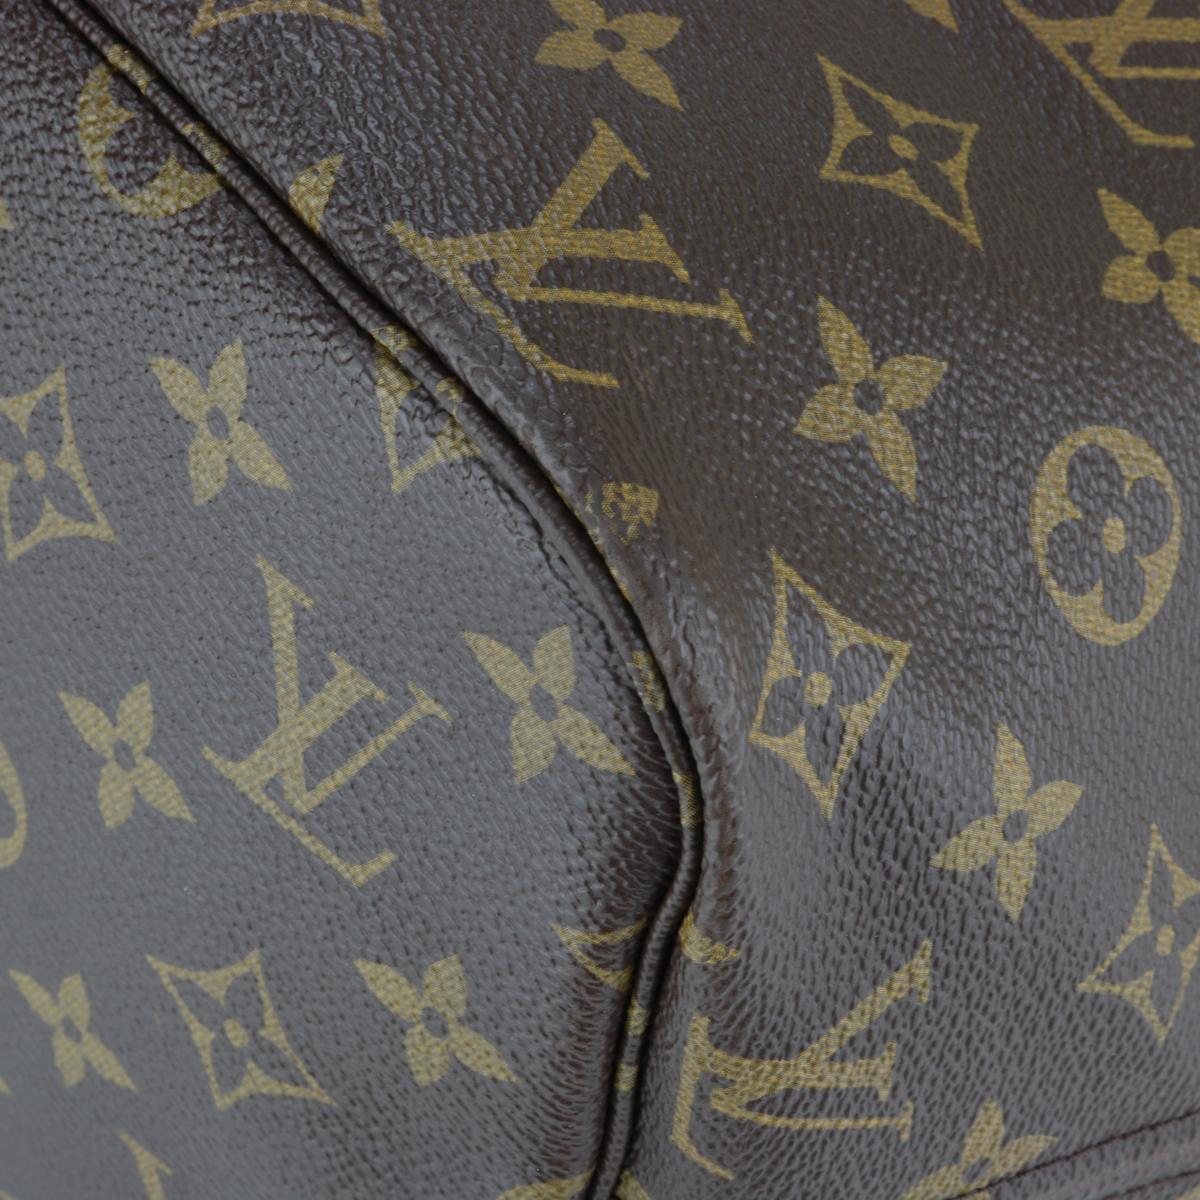 Louis Vuitton Neverfull MM Bag in Monogram with Beige Interior 2014 For Sale 2